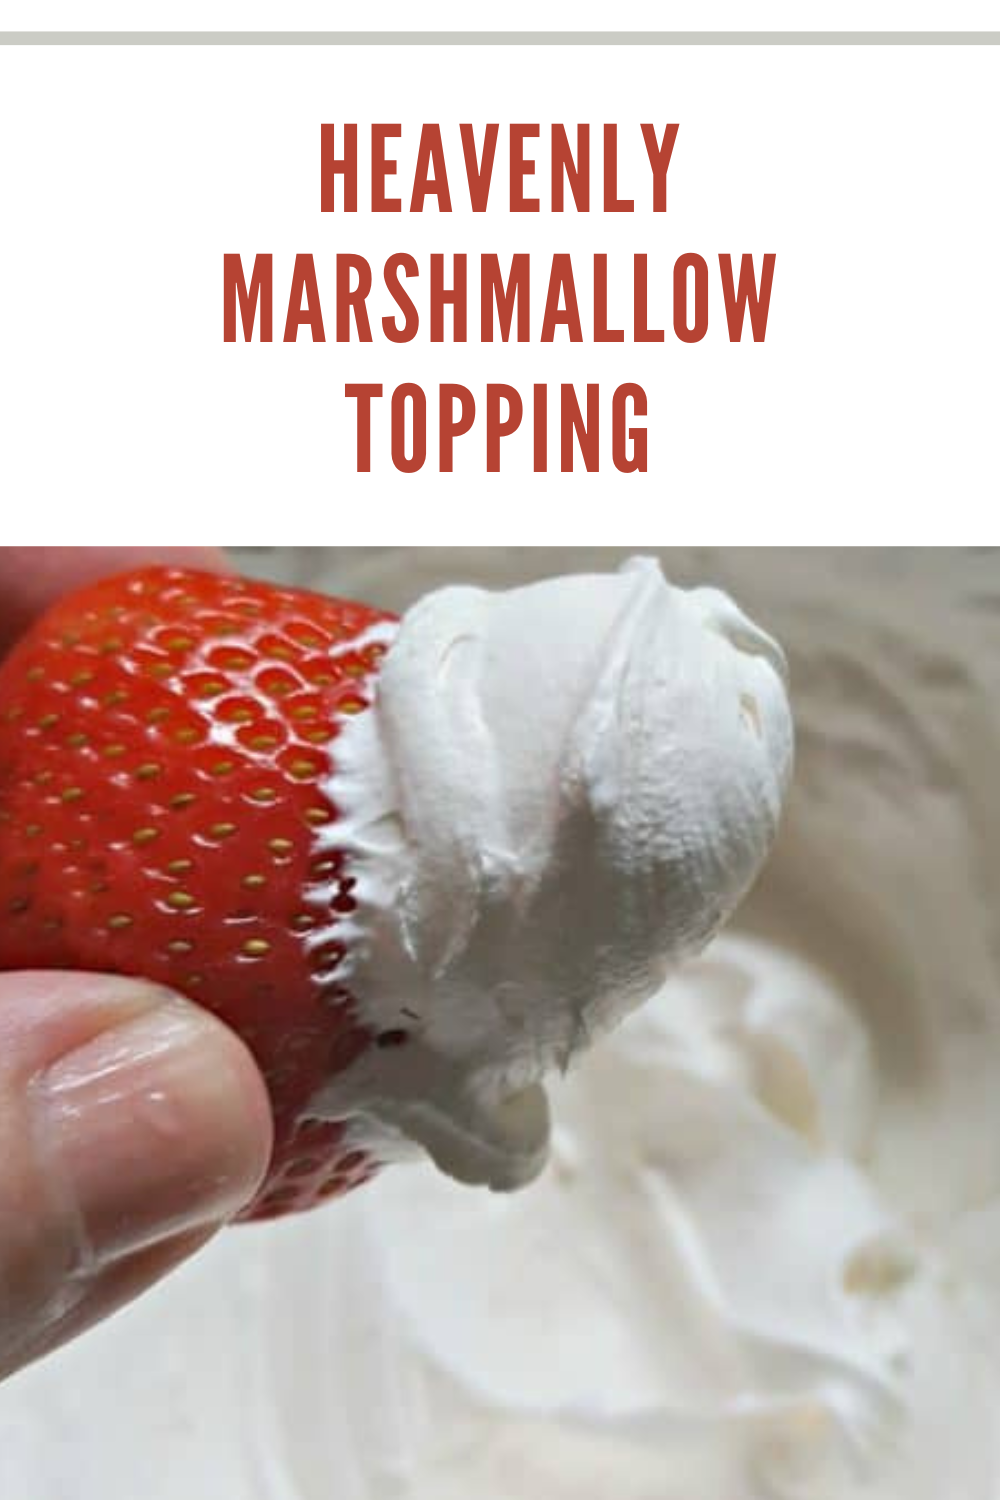 heavenly marshmallow topping